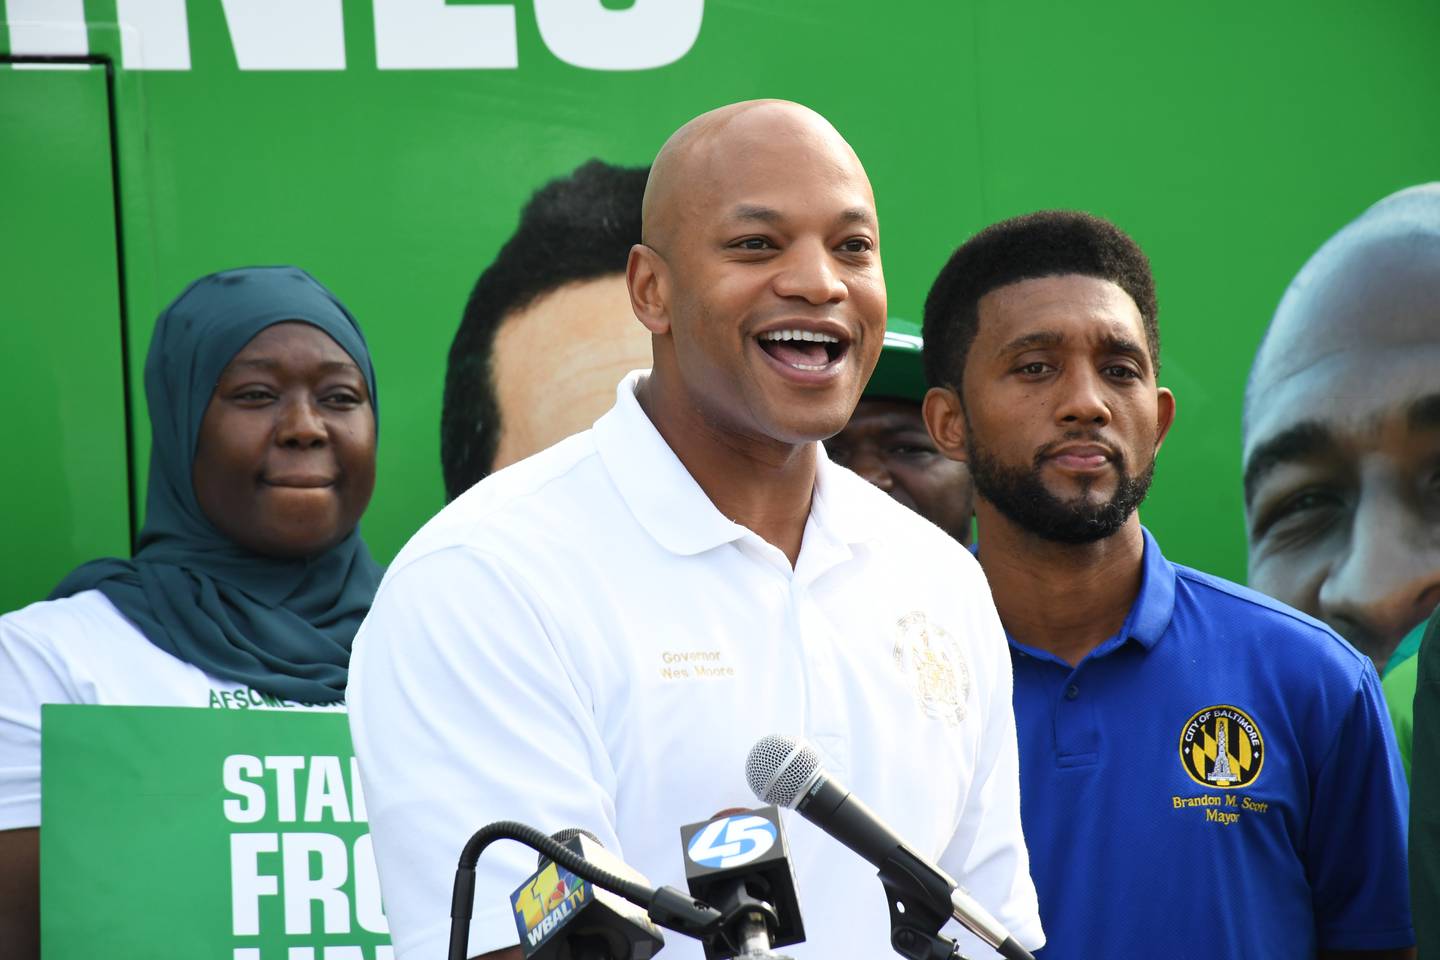 Gov. Wes Moore speaks about the importance of hiring government workers during an event outside the AFSCME union building in southwest Baltimore on Saturday, Sept. 9, 2023. He's joined by Baltimore Mayor Brandon Scott, at right.